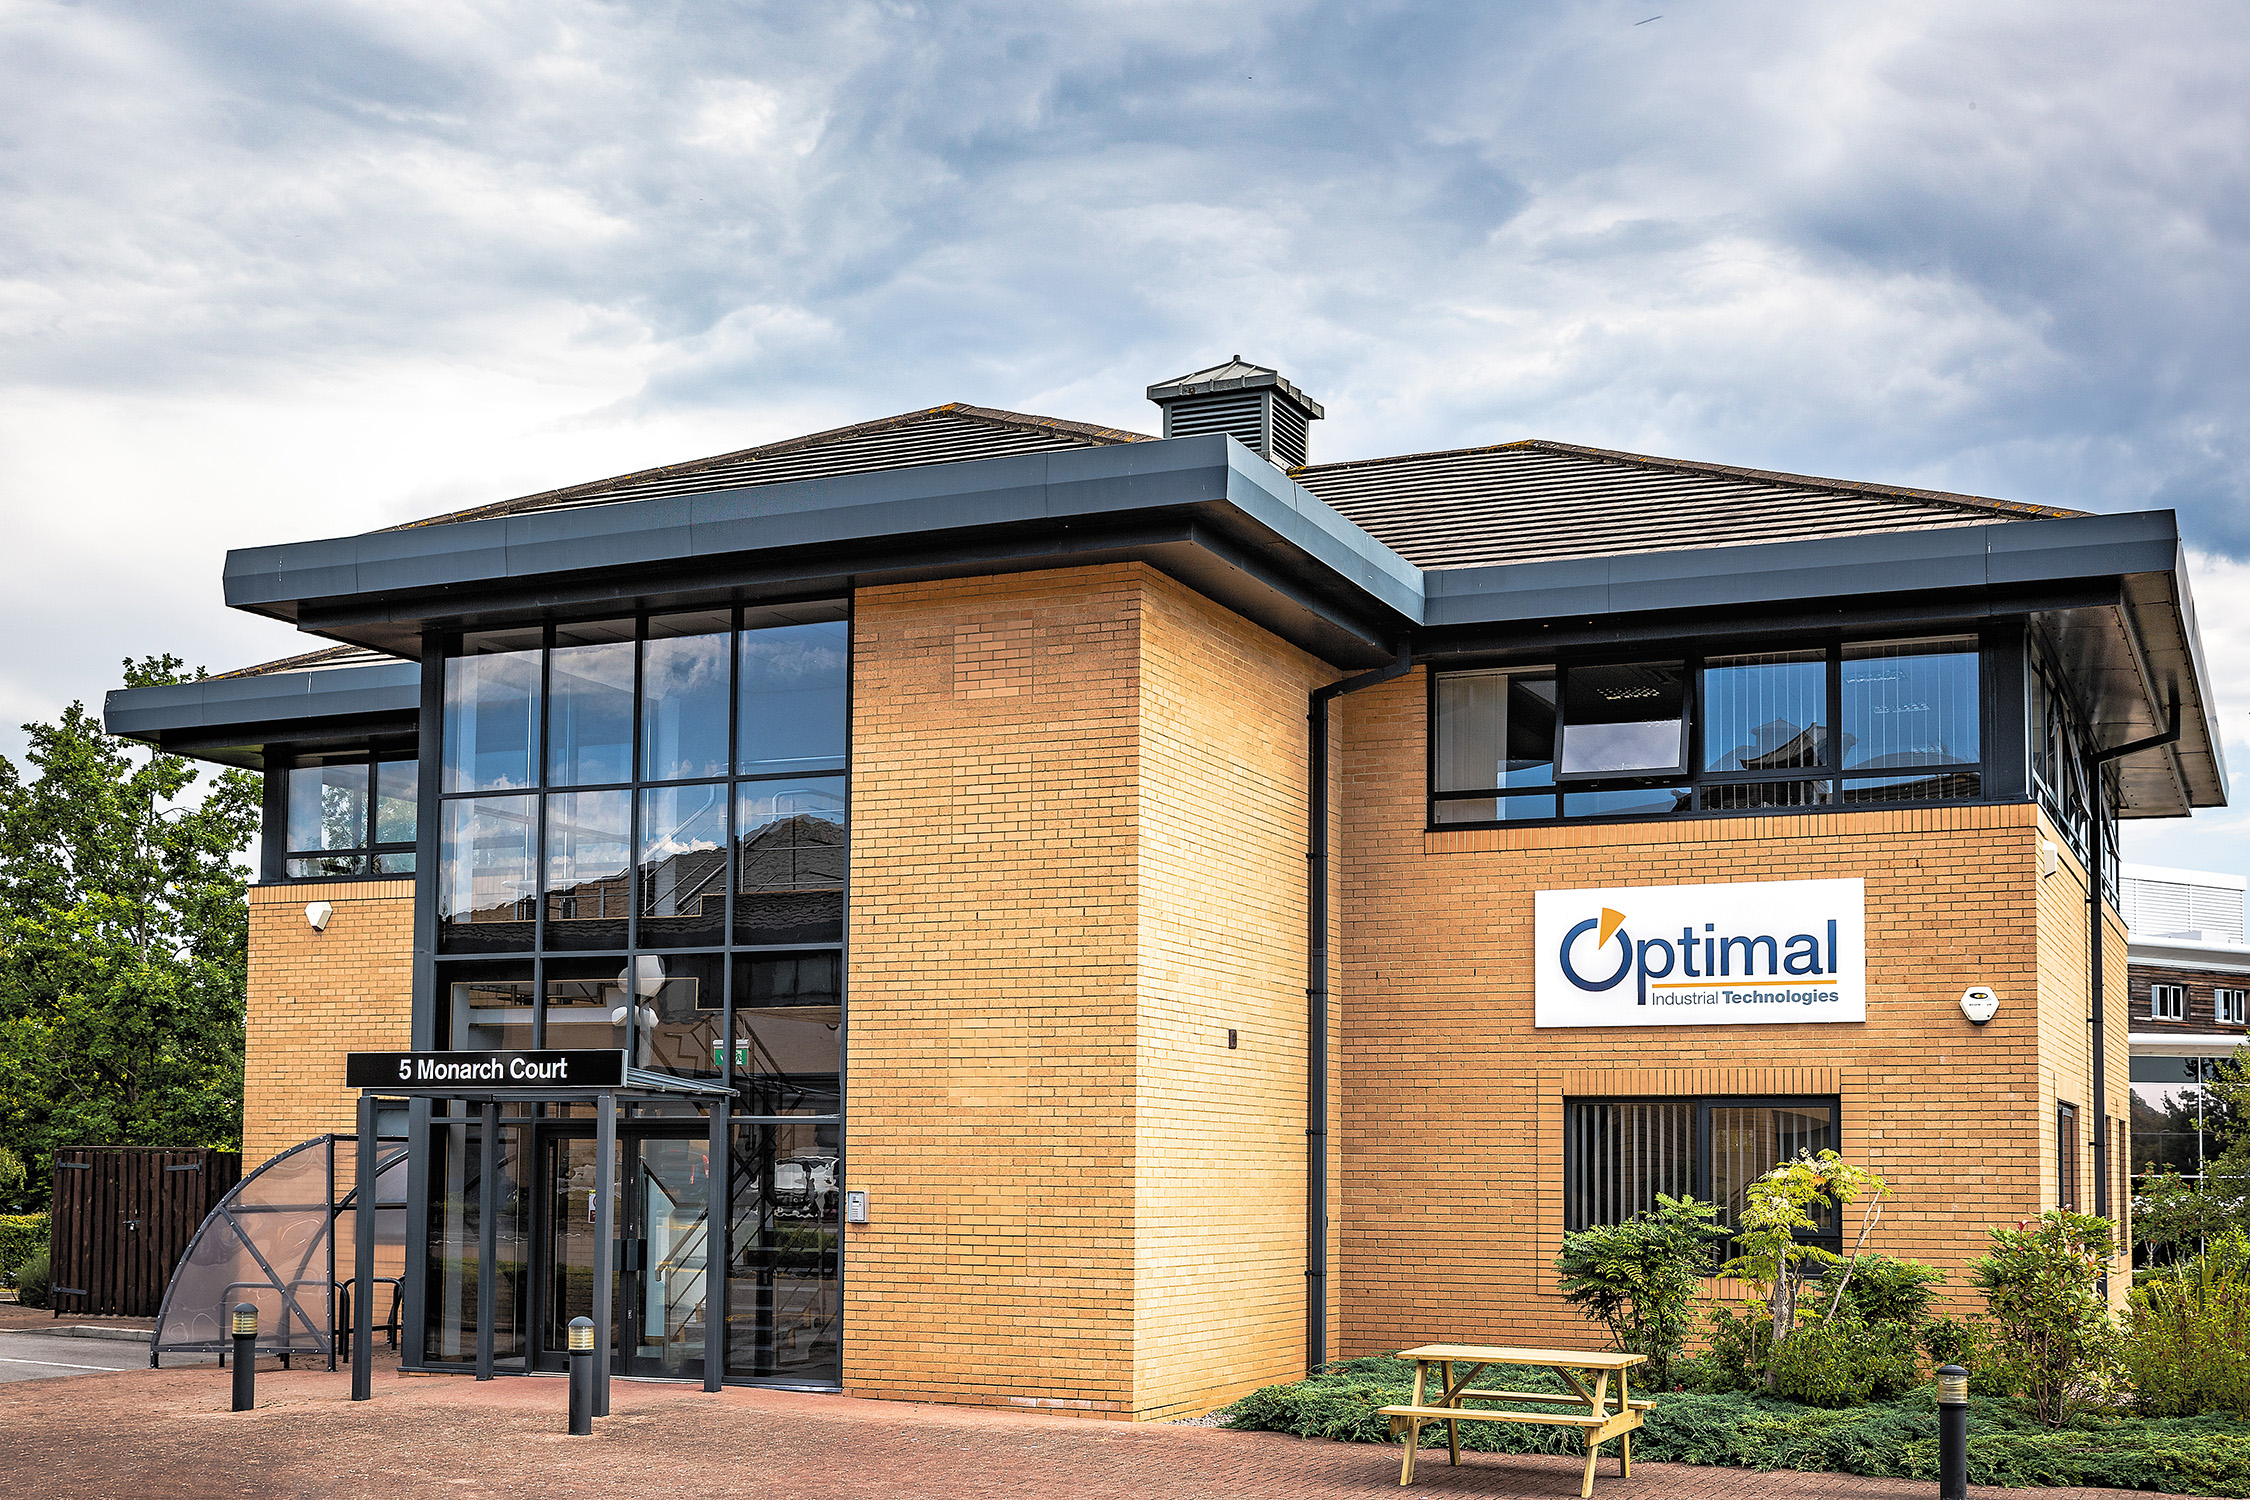 Optimal Industrial Technologies has moved from Westerleigh Business Park into a modern facility in Emersons Green, Bristol which has enabled it to expand its operations.